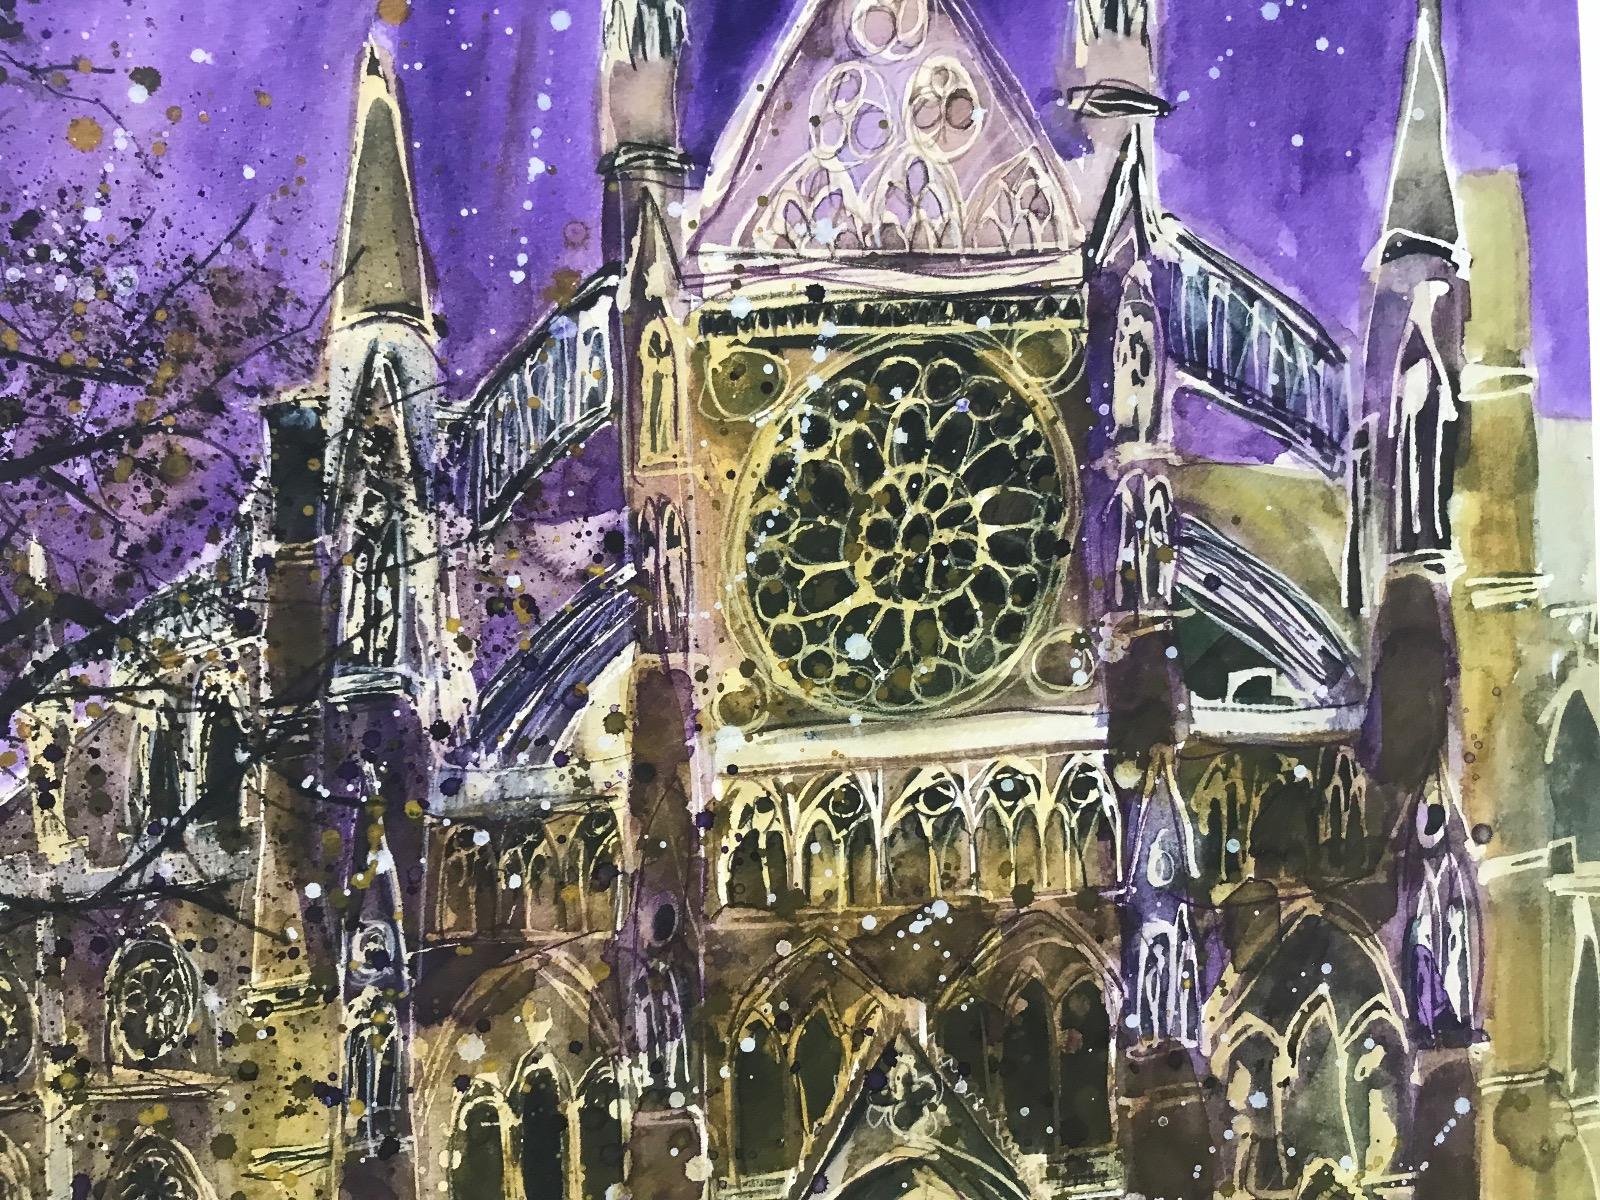 8 Setting for Great Pageants, Westminster Abbey, London is an original giclee print by Susan Brown. Depicting the famous Westminster Abbey on a winters evening. A bright purple sky torches the city. The bare tree provides minimal cover for the